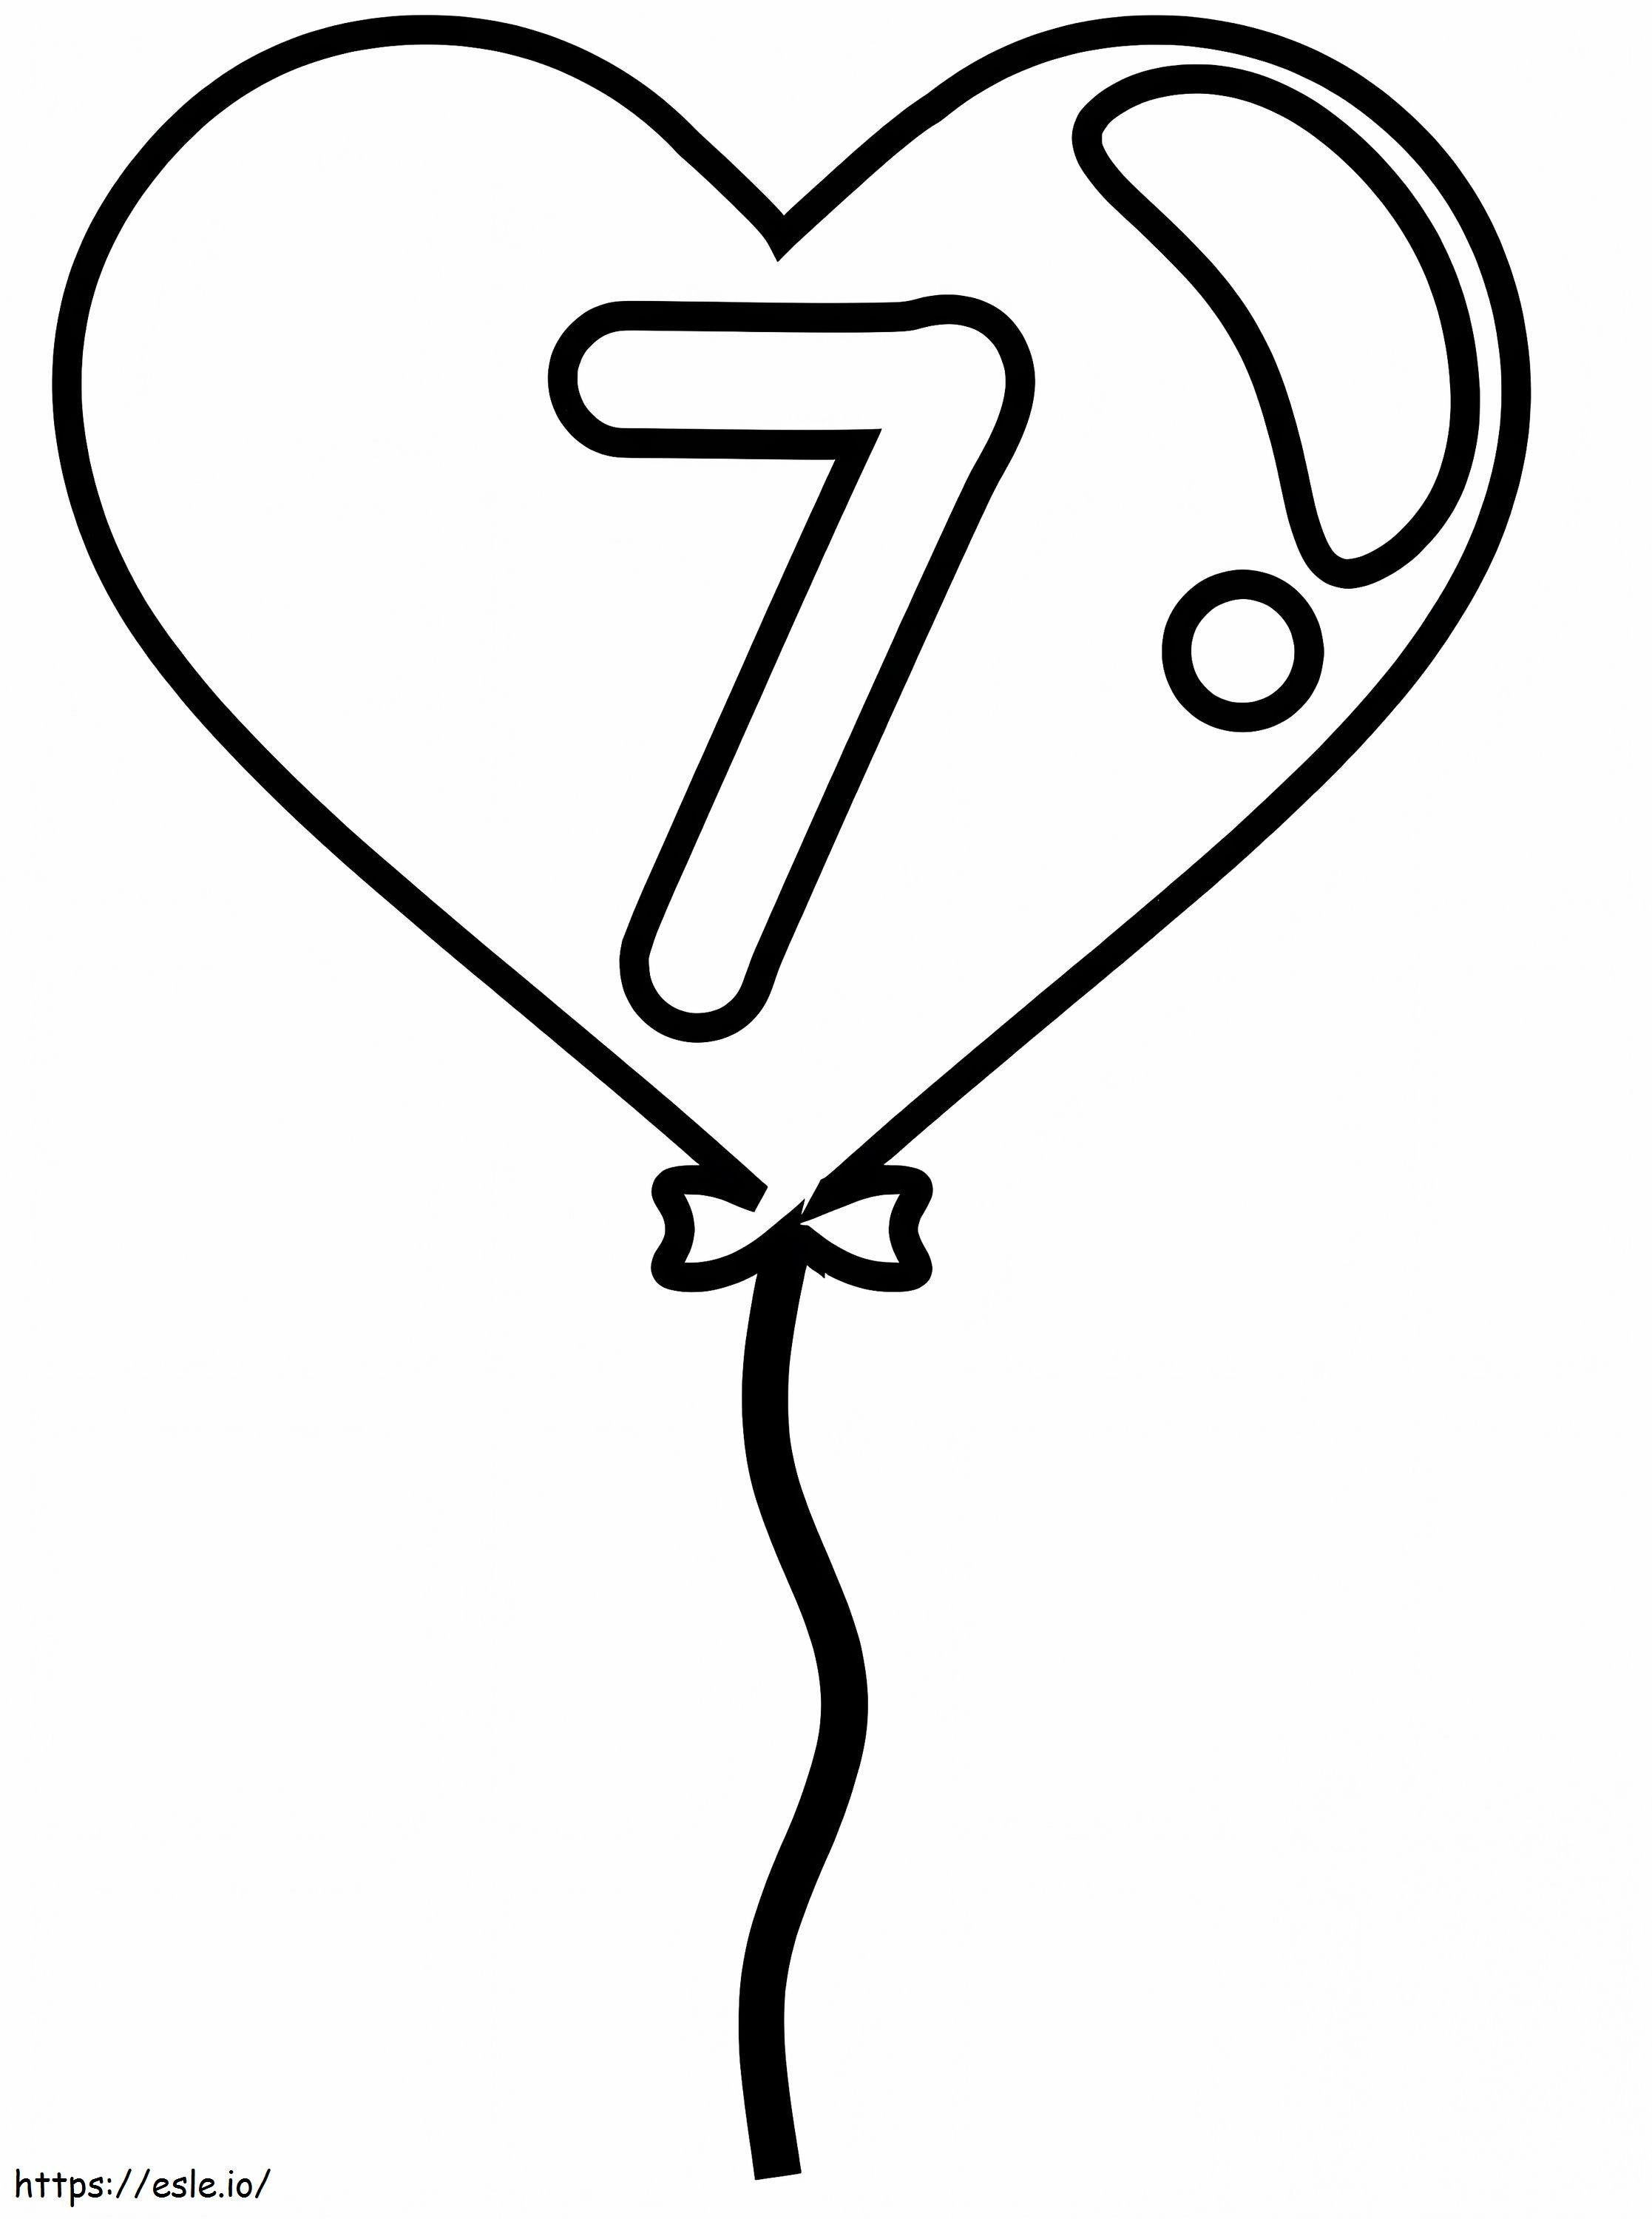 Number 7 In Balloon coloring page